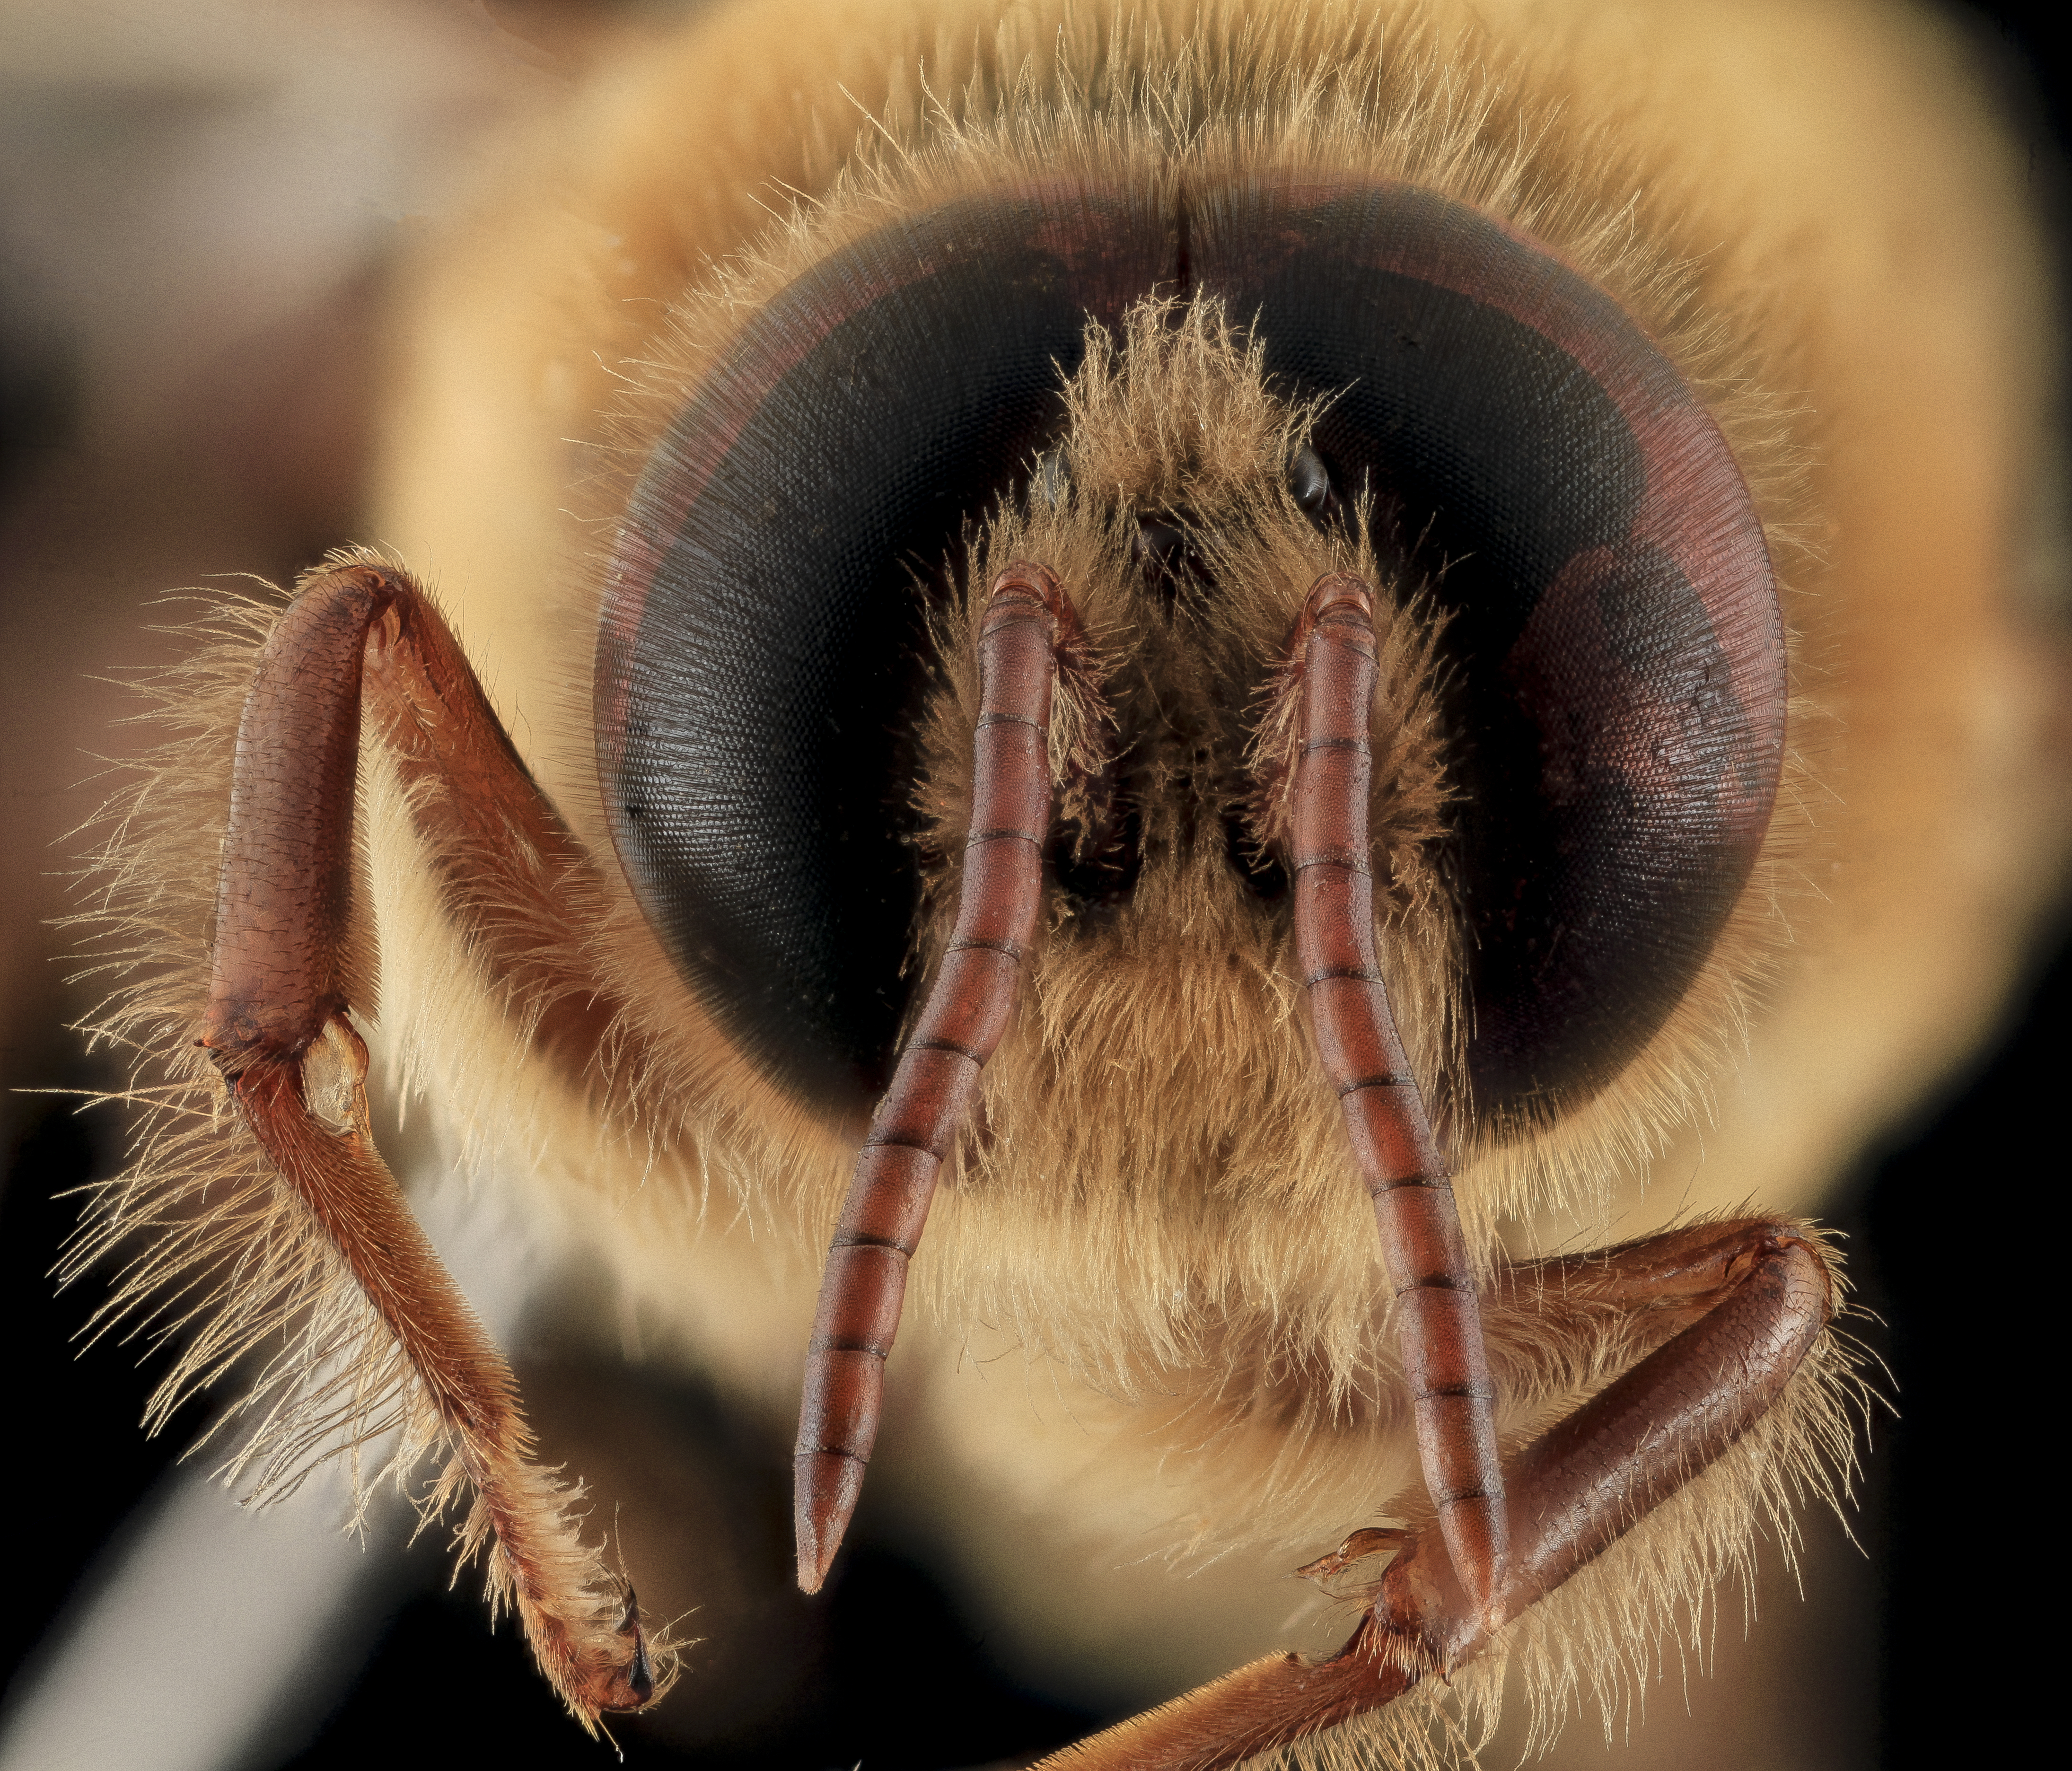 Apis mellifera, Drone, face2, MD, Talbot County 2013-09-30-18.21.11 ZS PMax (10062826934)